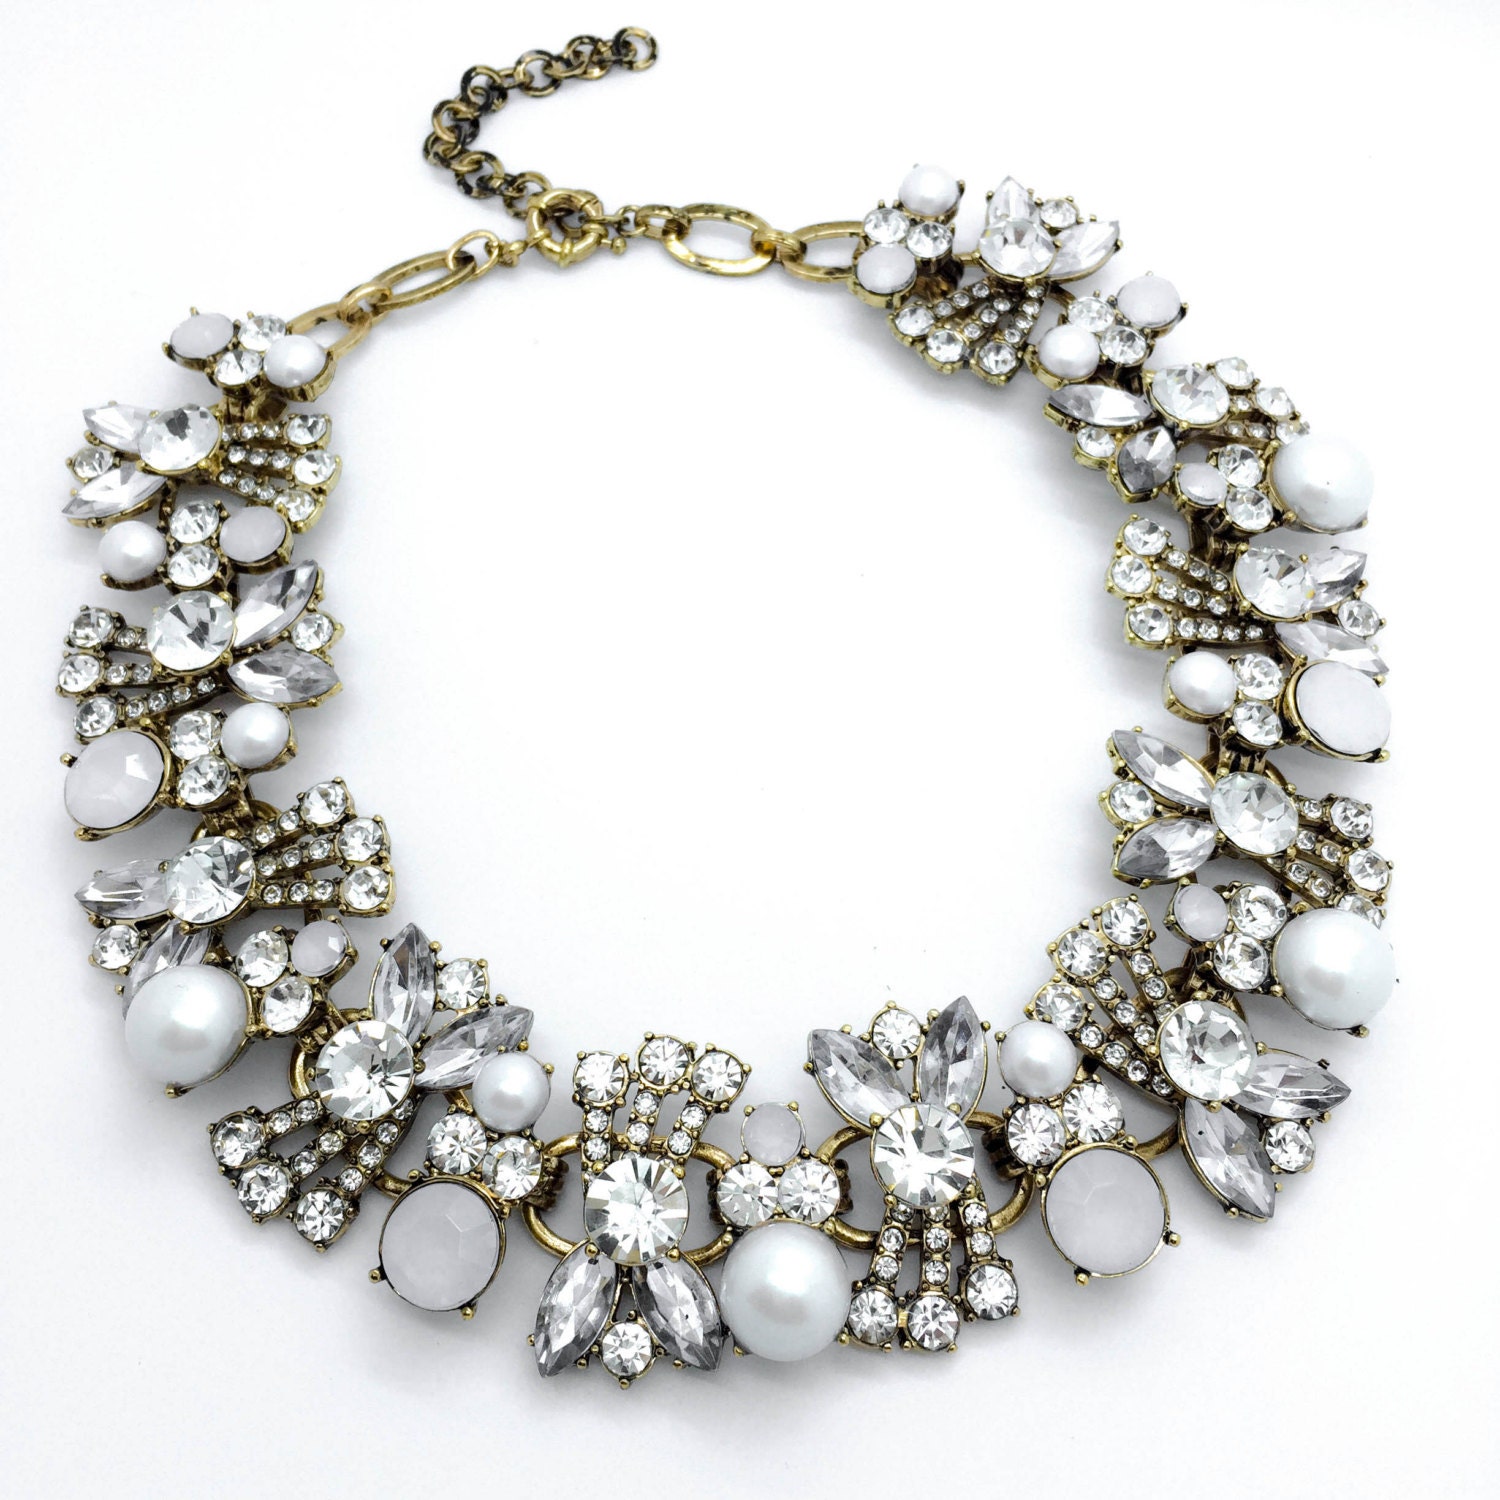 Faux Pearl Statement Necklace chunky Necklace Rhinestone by Cetro